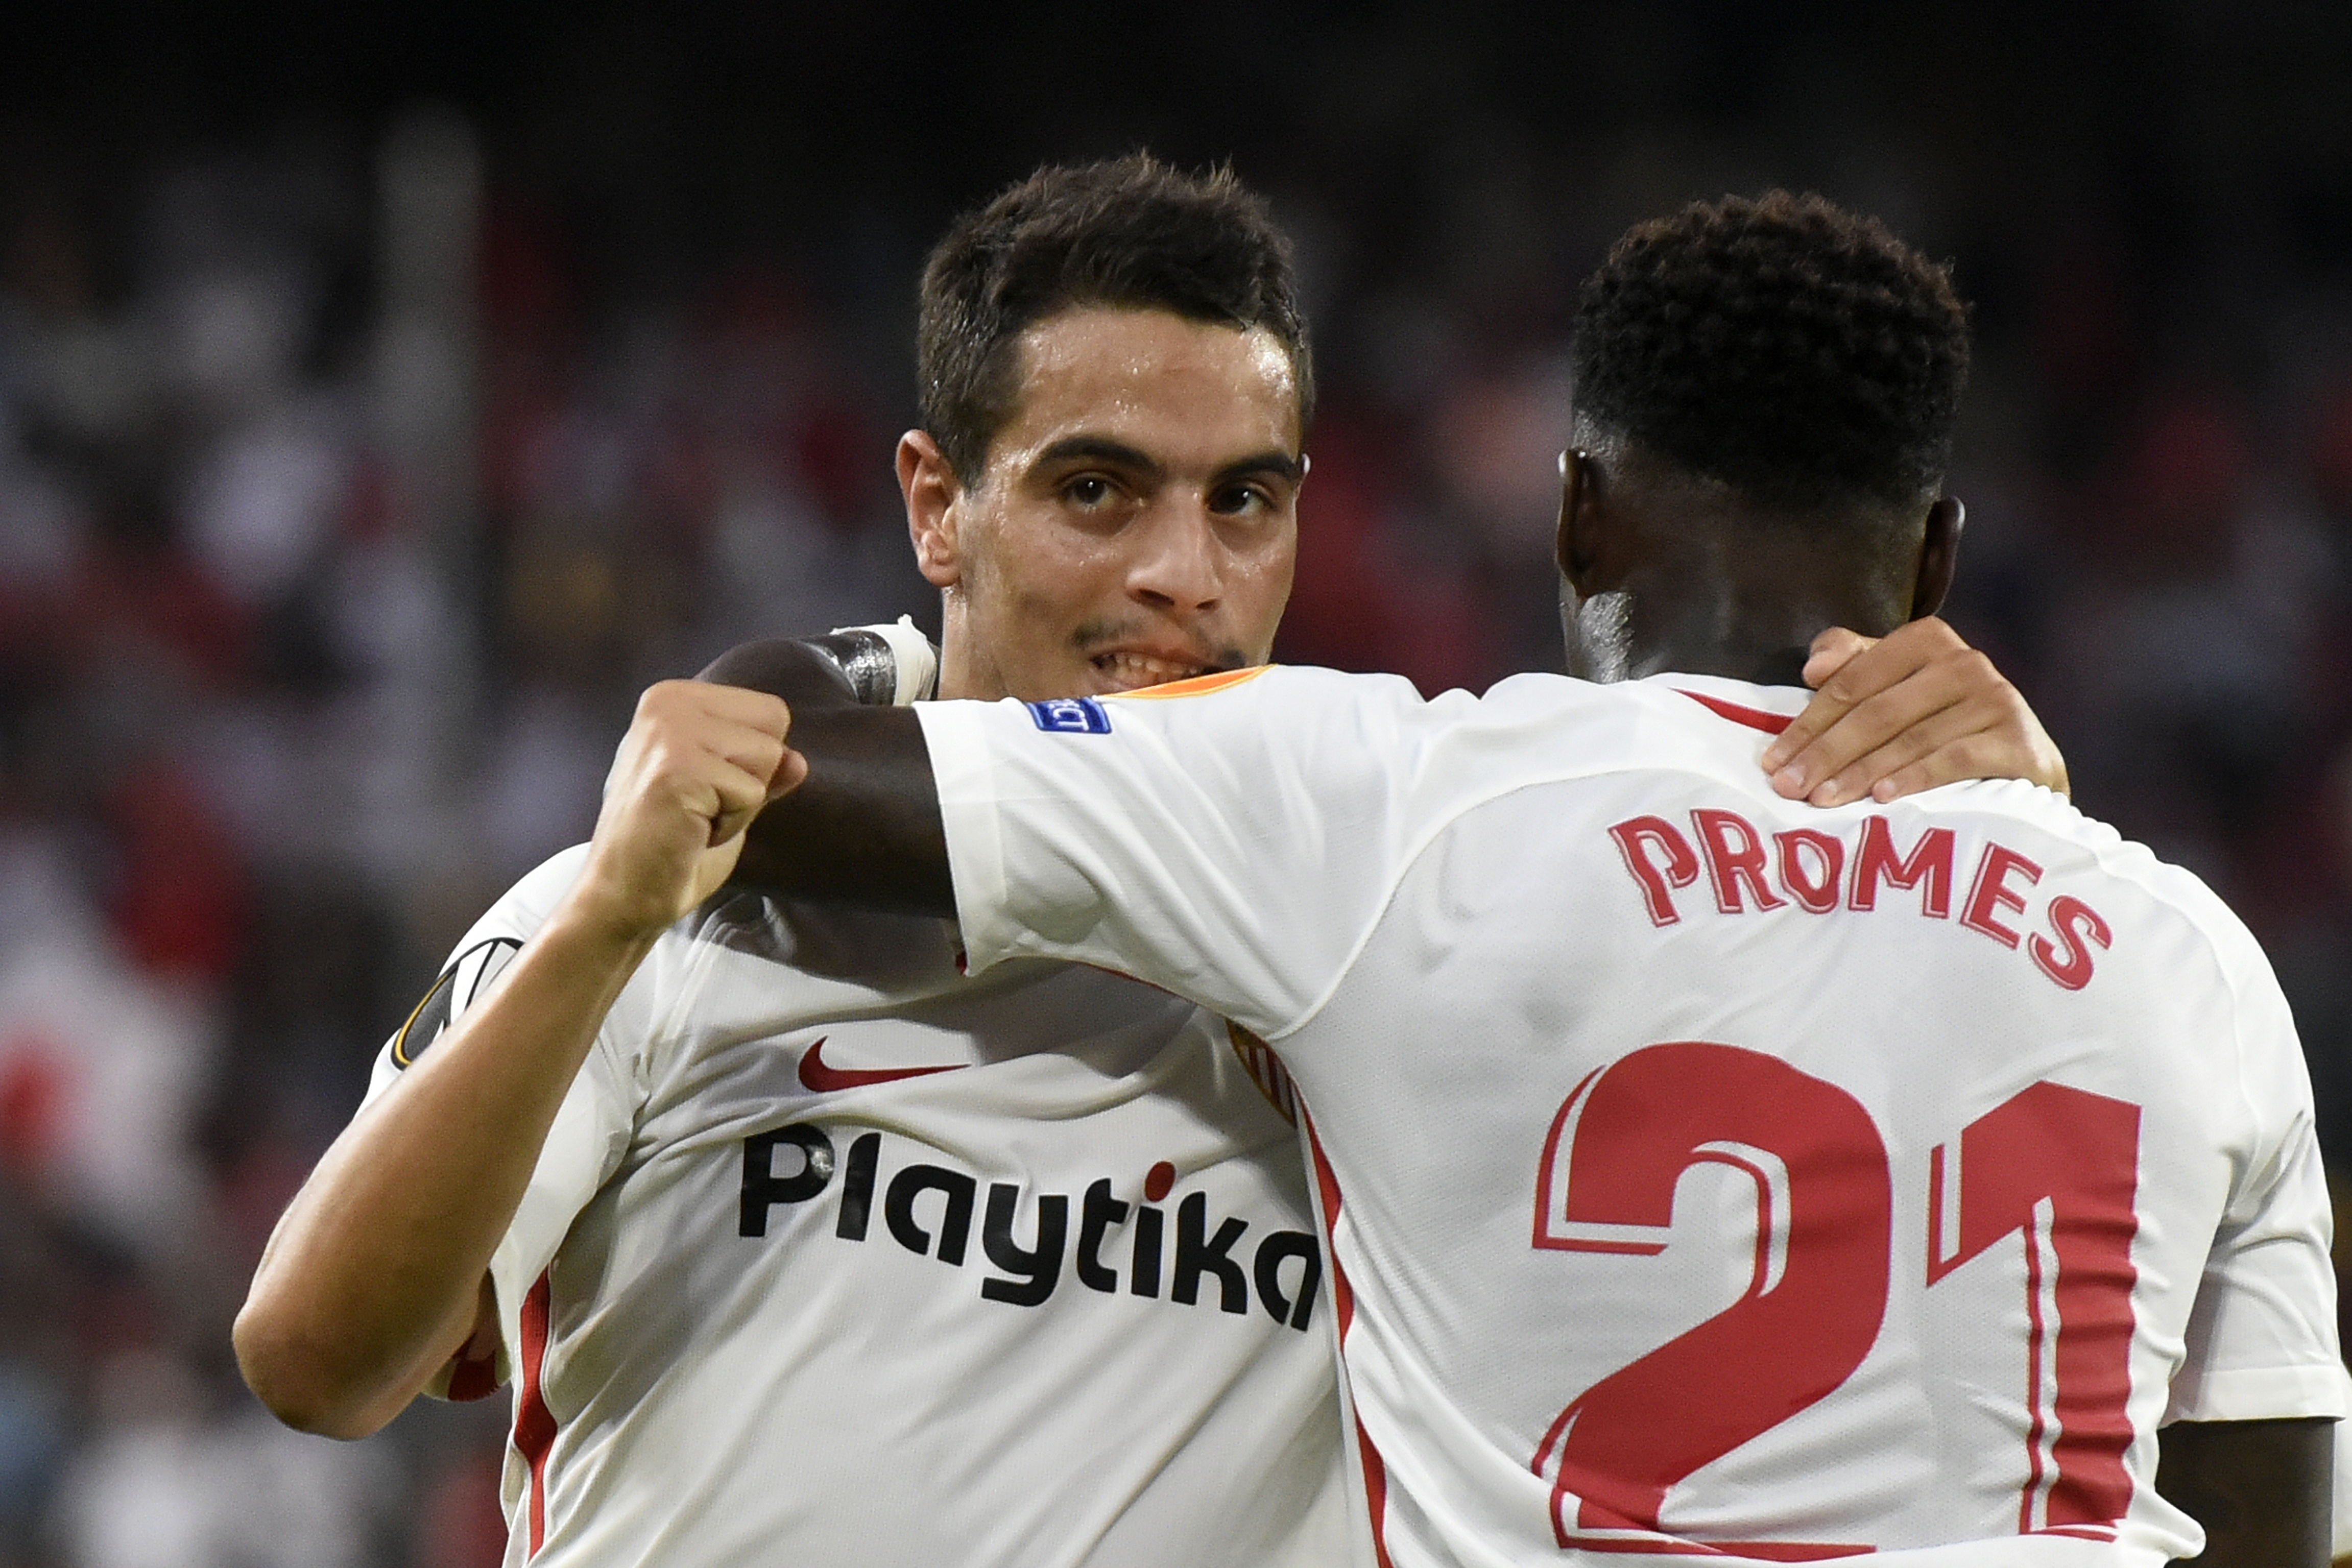 Ben Yedder celebrates a goal with Promes